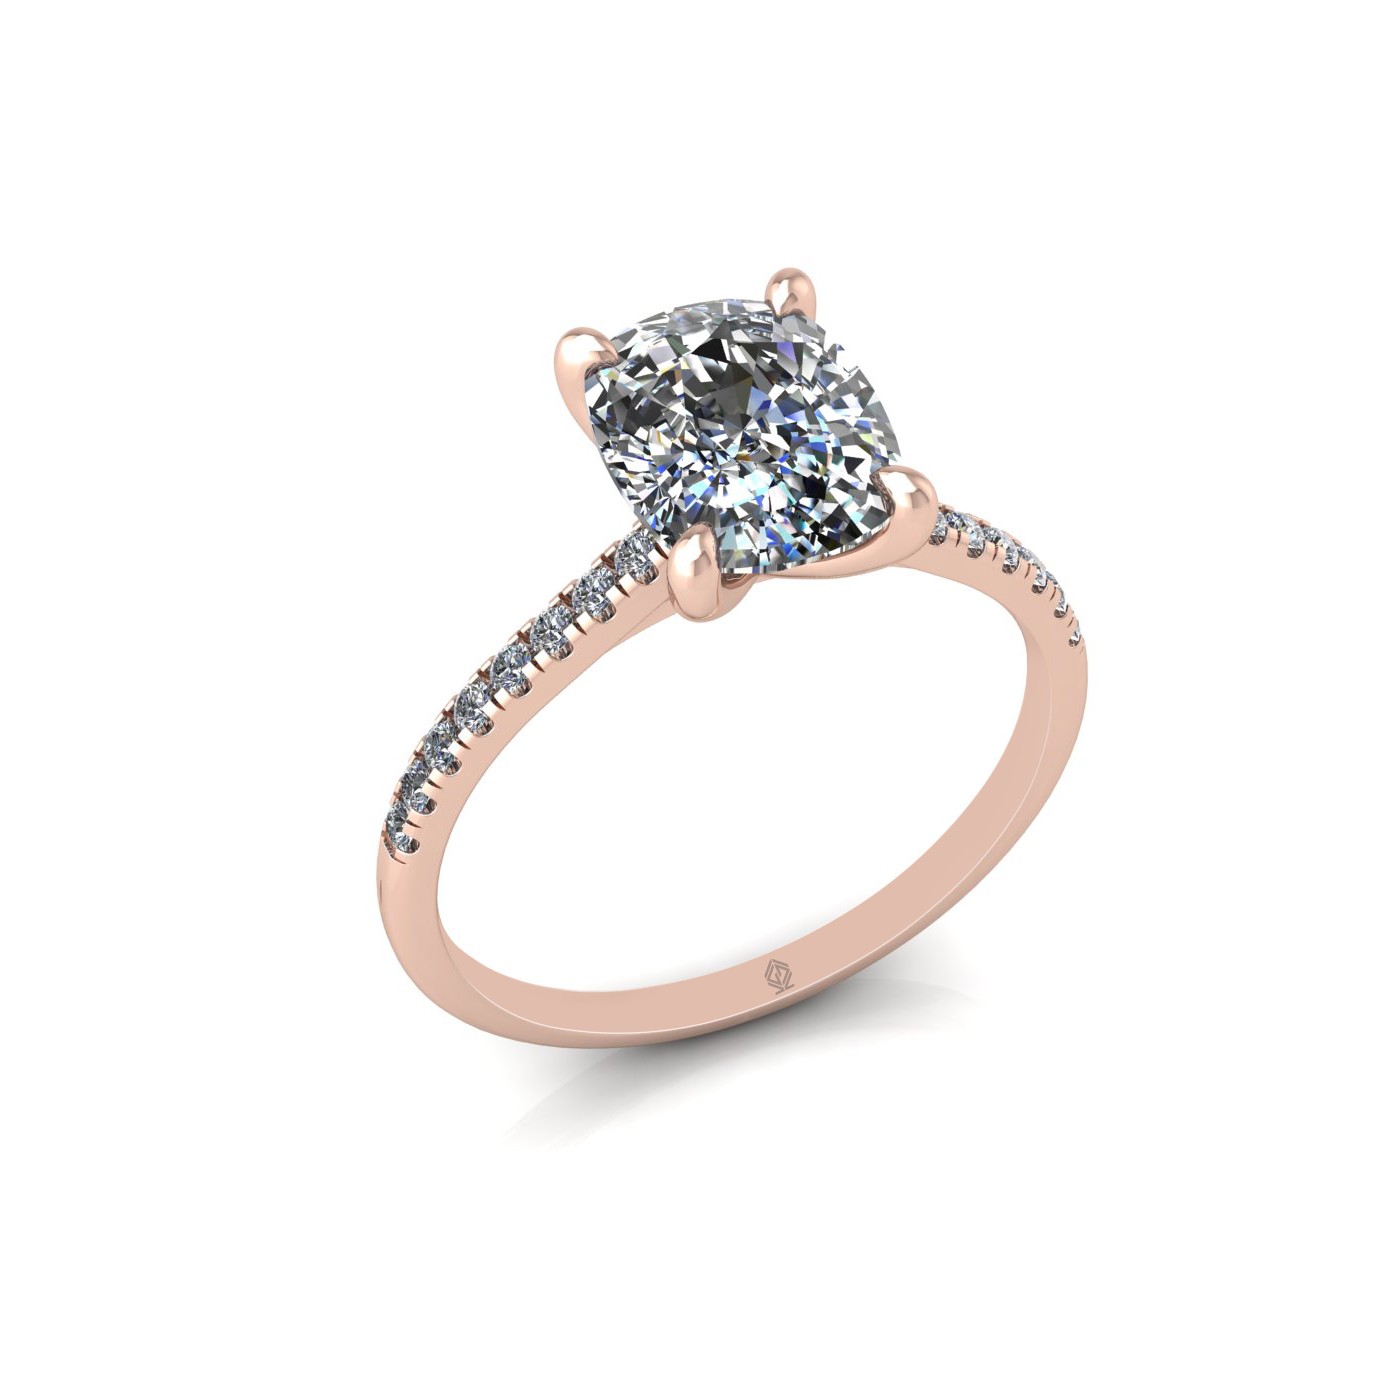 18k rose gold  4 prongs cushion cut diamond engagement ring with whisper thin pavÉ set band Photos & images